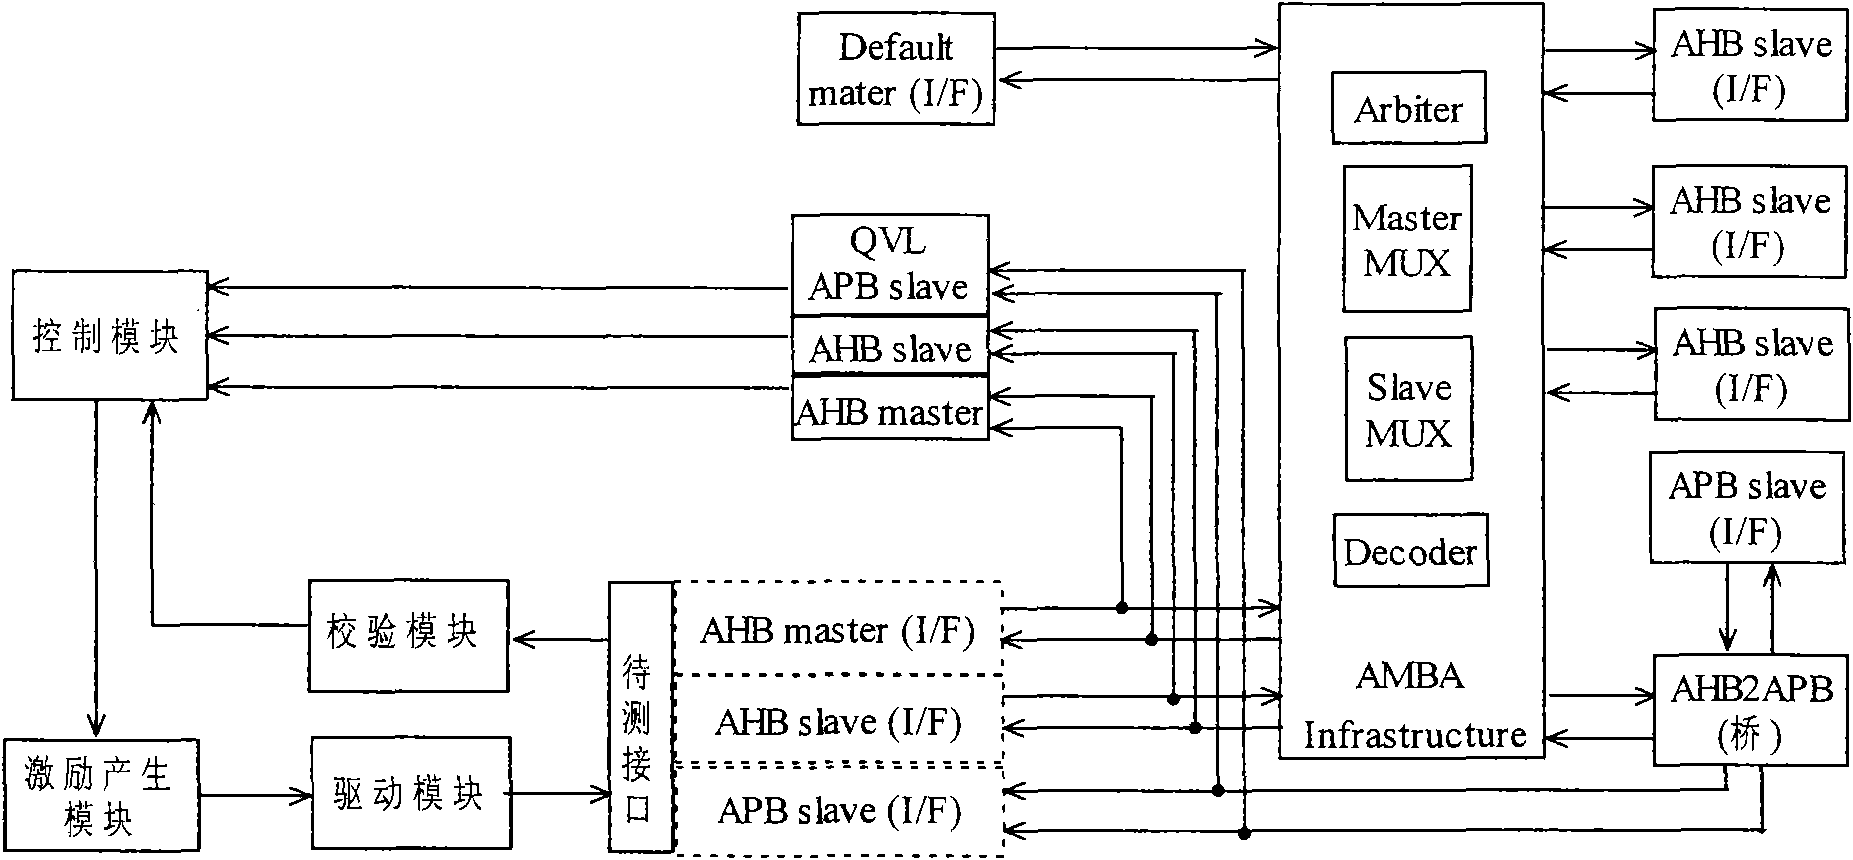 Universal method and platform for verifying compatibility between intellectual property (IP) core and advanced microcontroller bus architecture (AMBA) bus interface